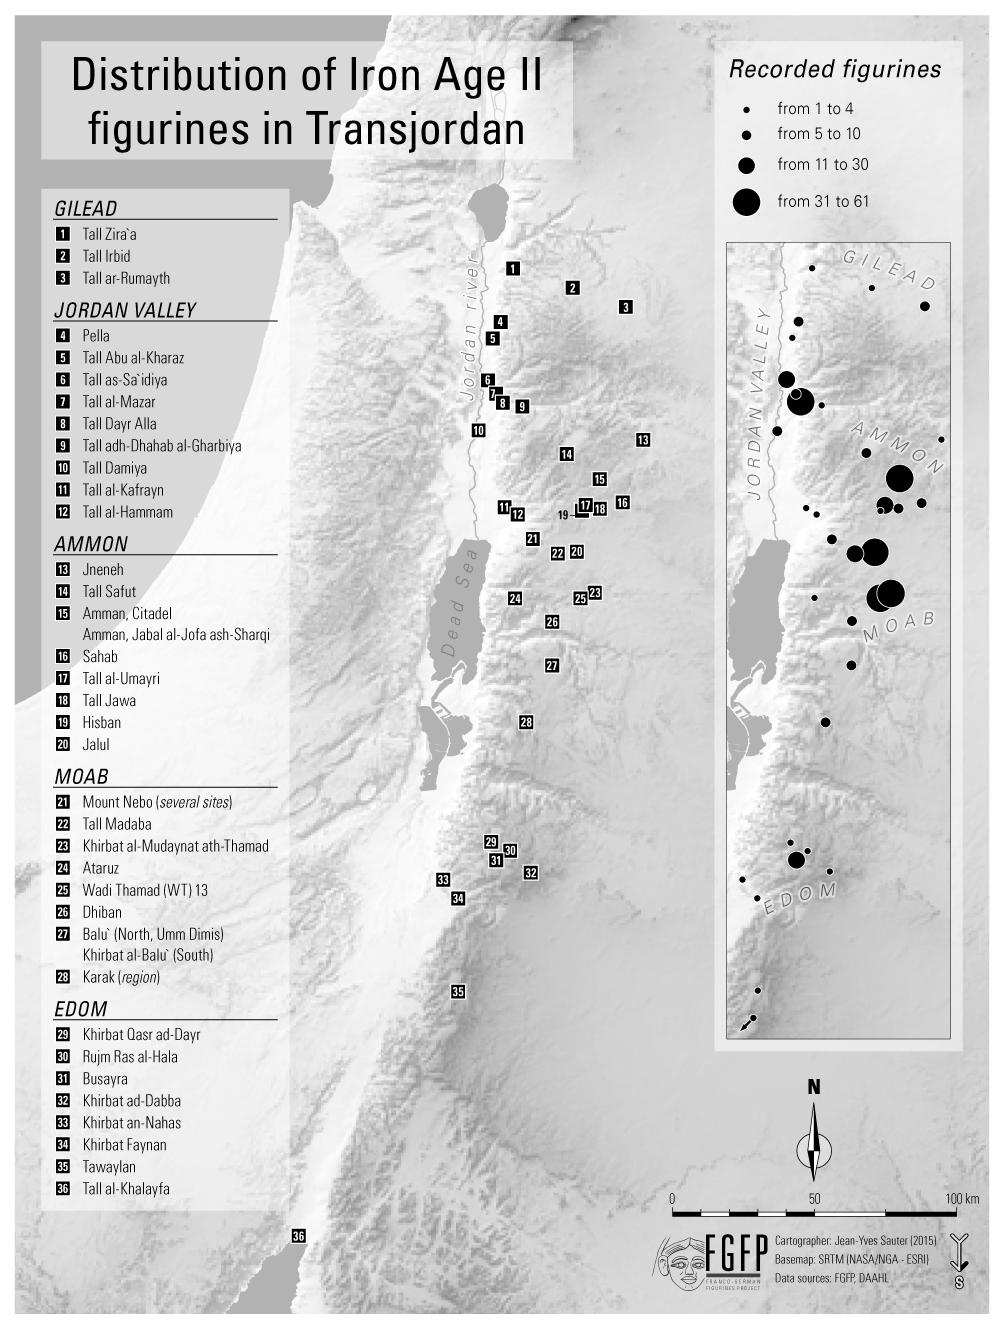 archaeological maps. Concerning a preliminary evaluation of the gathered data see part II of this article presented by Astrid Nunn.